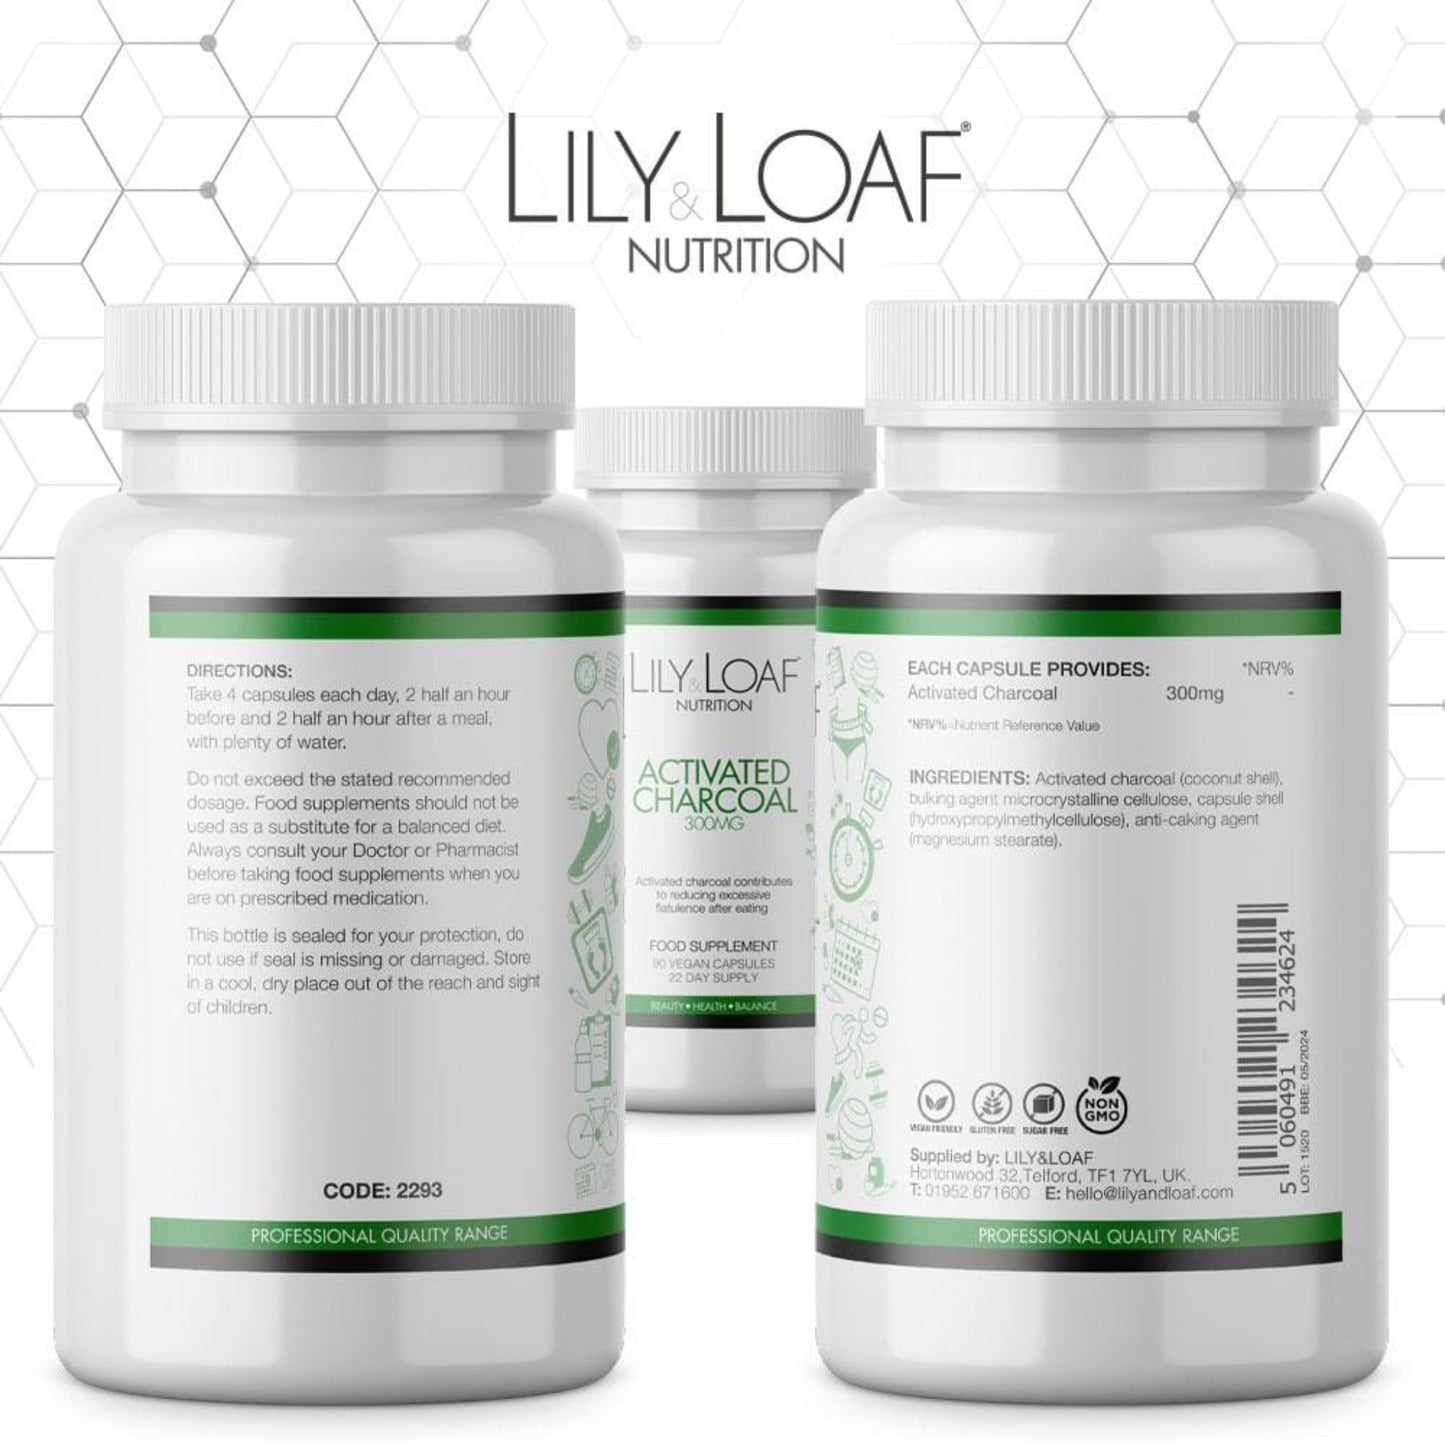 Lily & Loaf Activated Charcoal Label Information